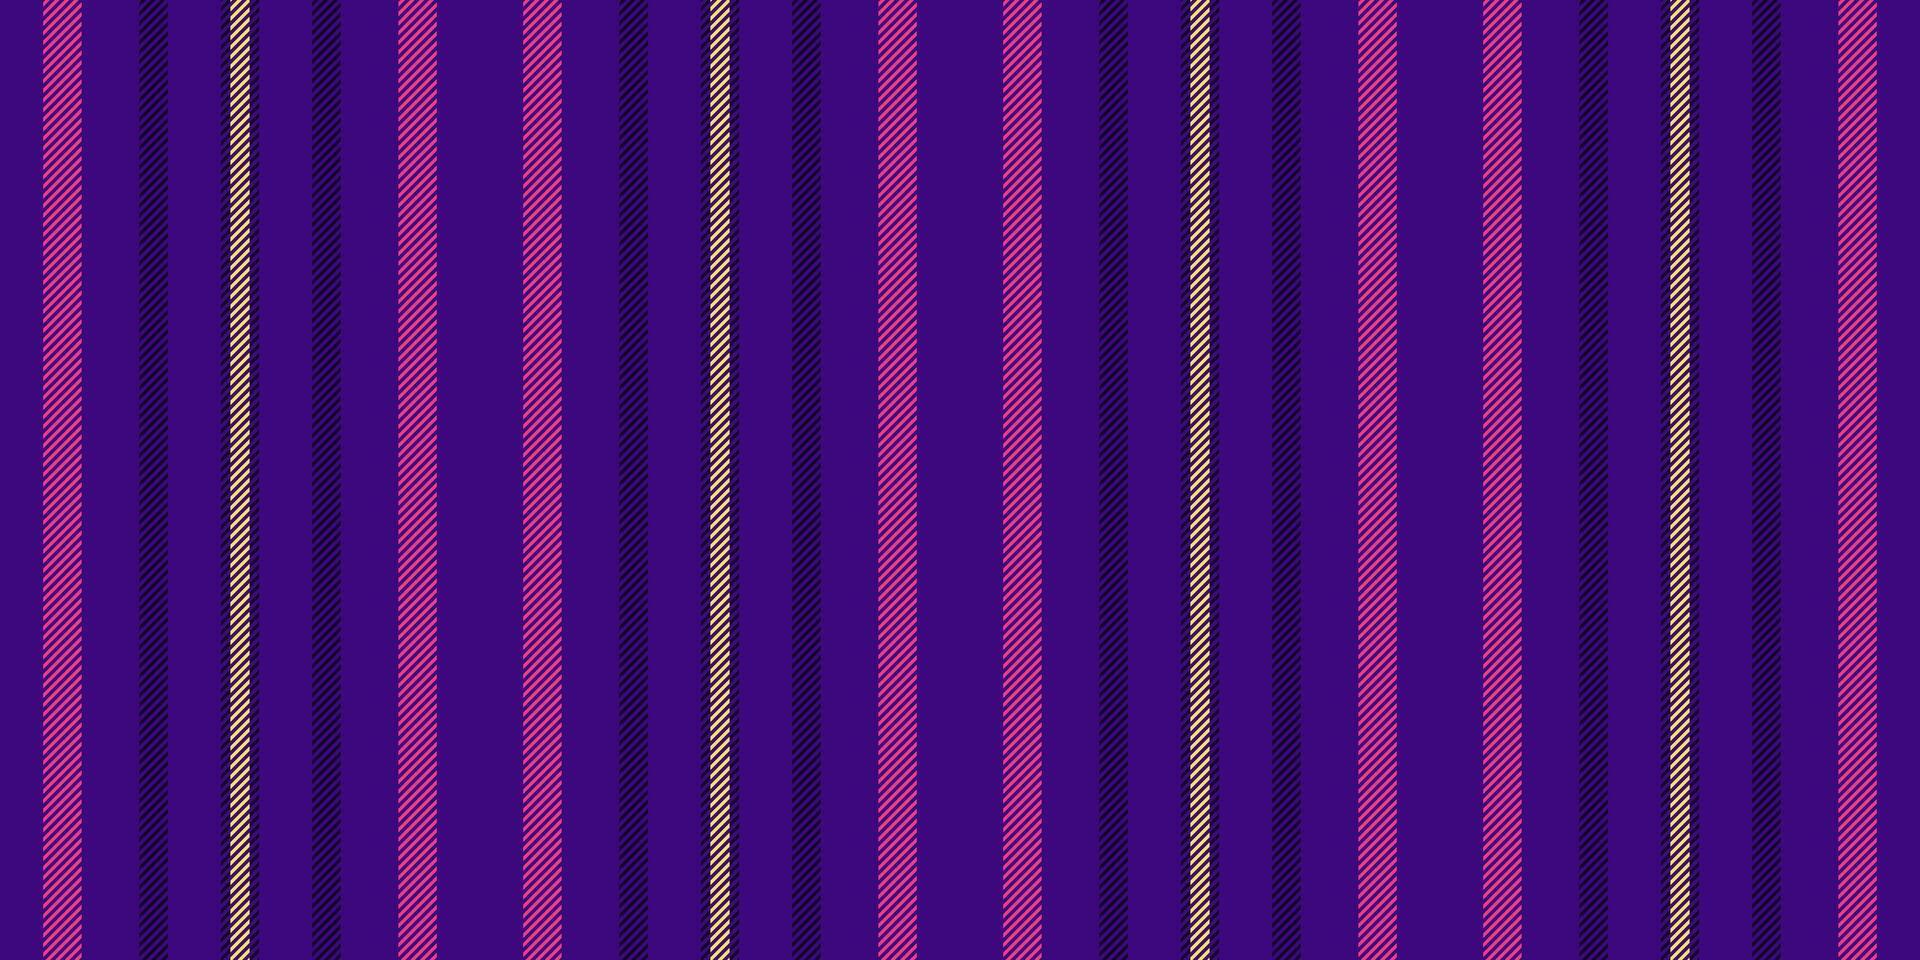 Curtain fabric texture pattern, machinery lines stripe background. Nice vector seamless textile vertical in violet and dark colors.